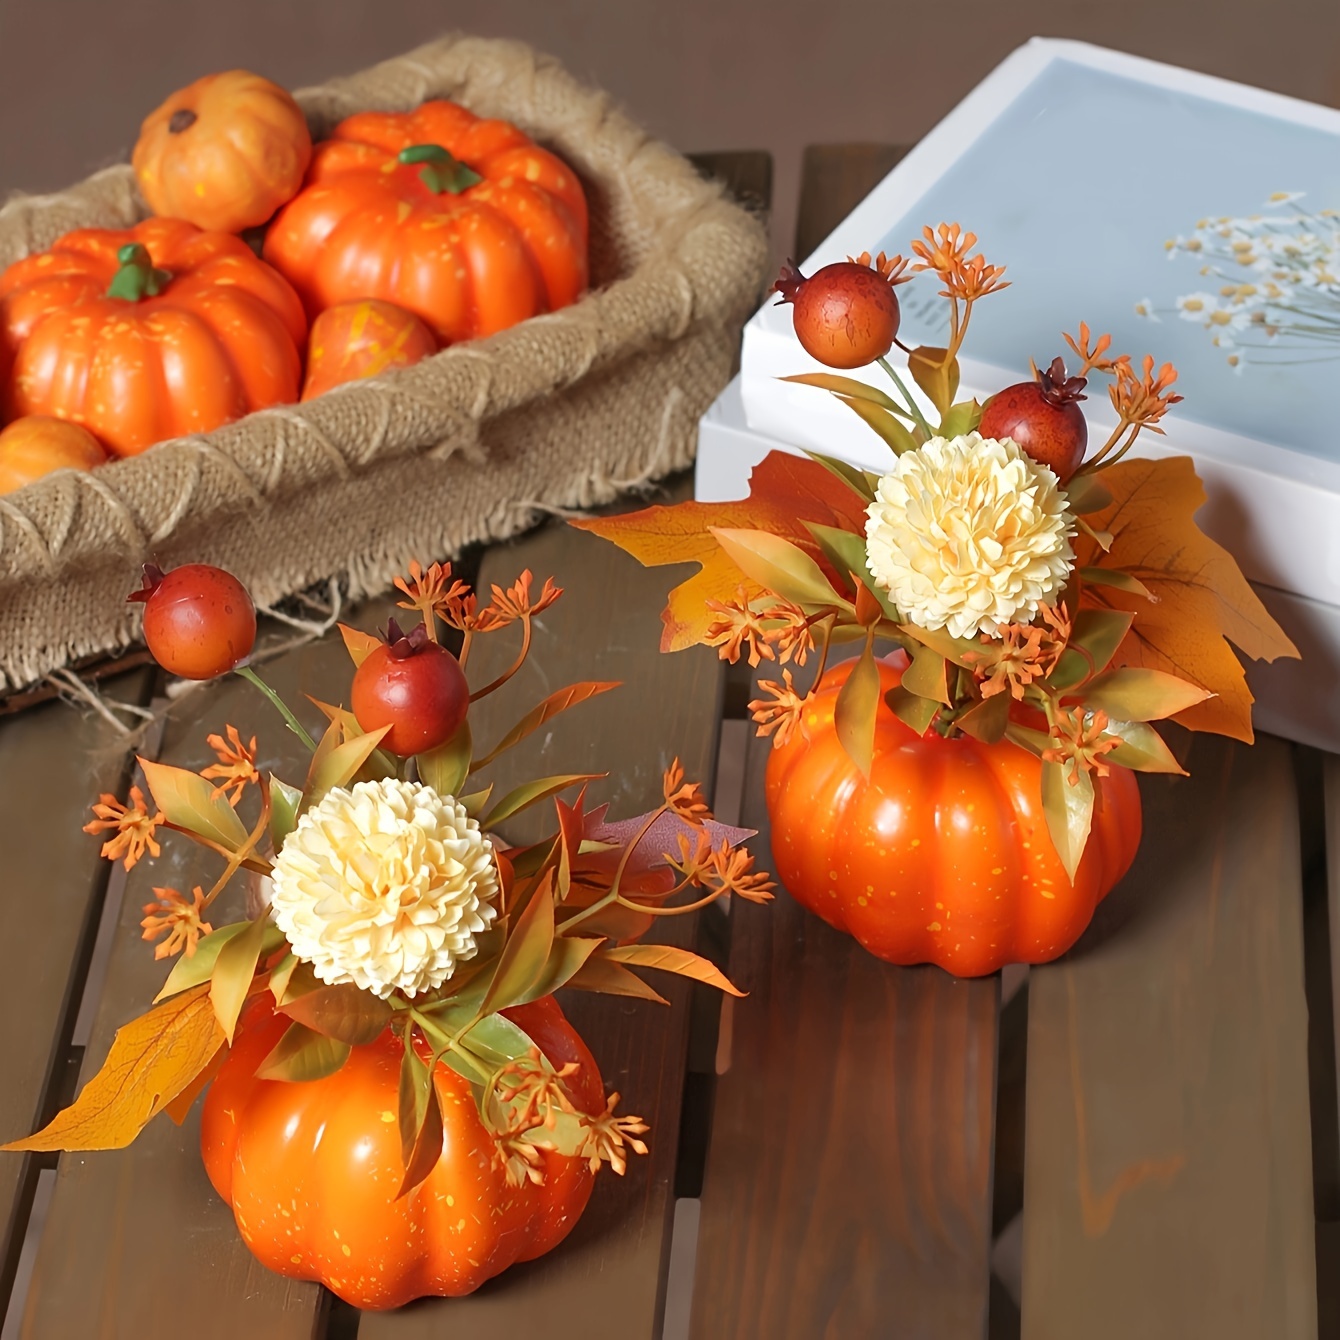 

1pc, Fall Pumpkin Decoration With Maple Leaves And Berries - Realistic Artificial Potted Plant For Table Centerpiece, Halloween Party, And Thanksgiving